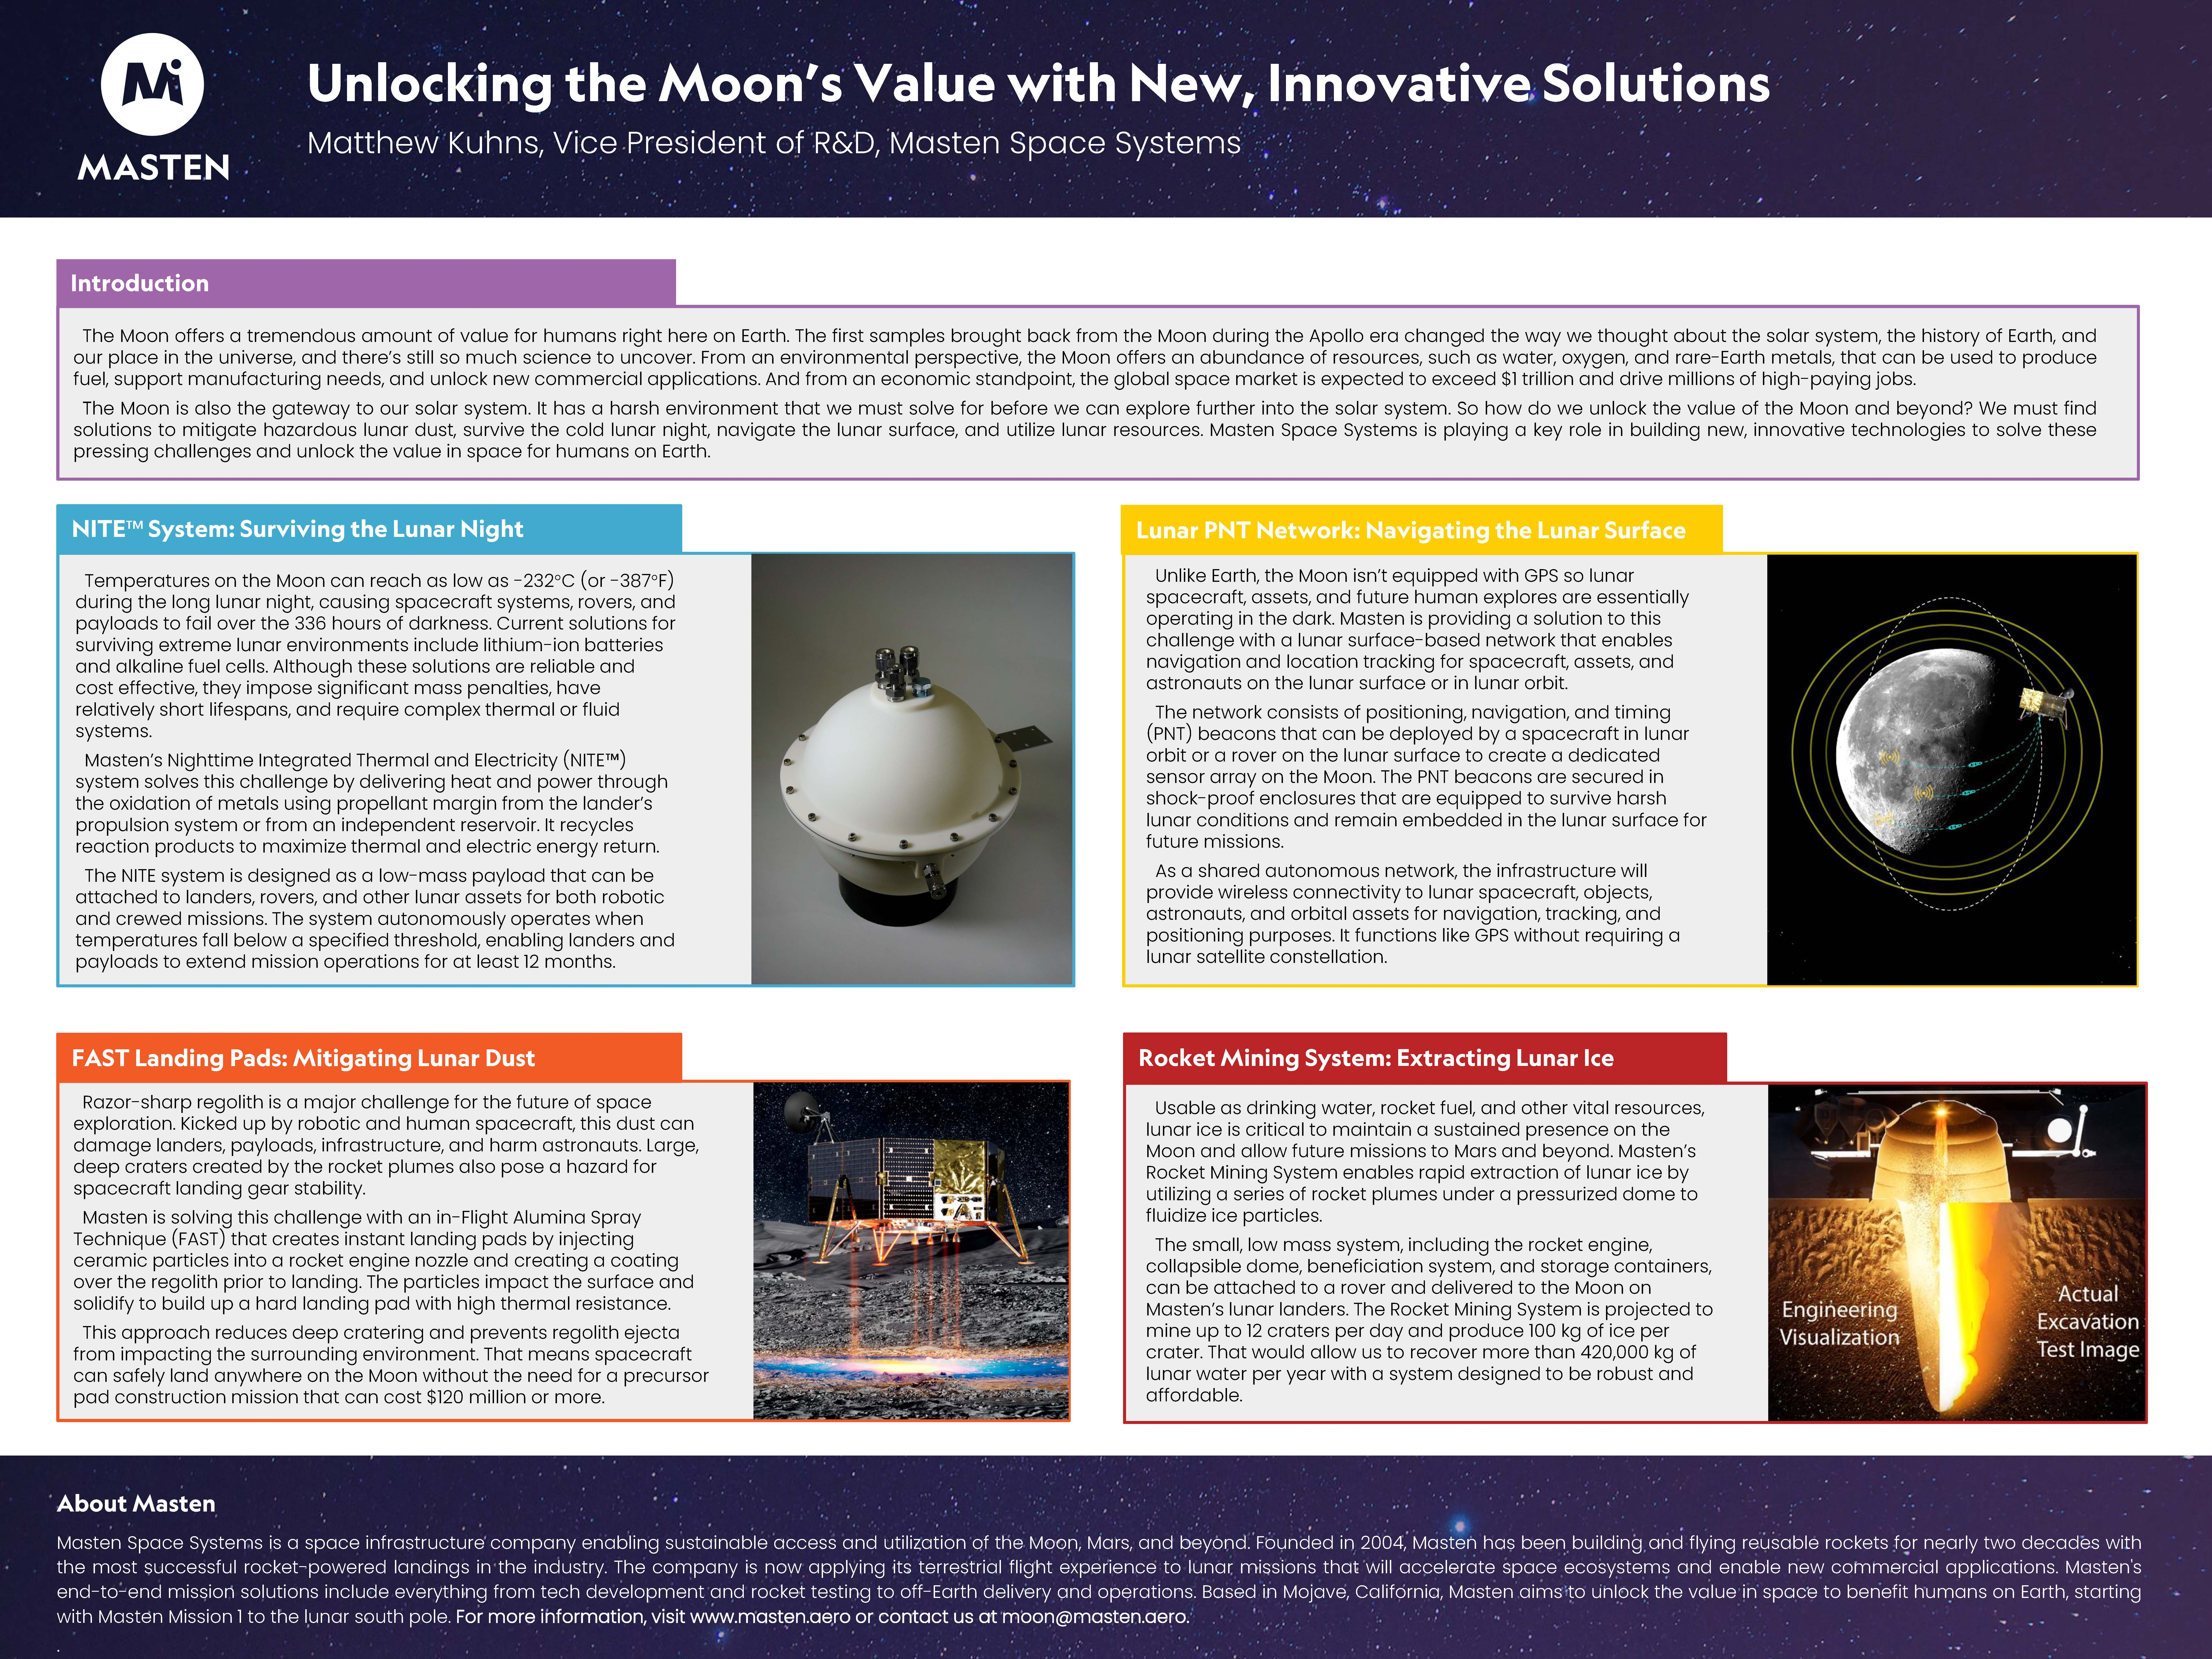 Unlocking the Value of the Moon with New, Innovative Solutions